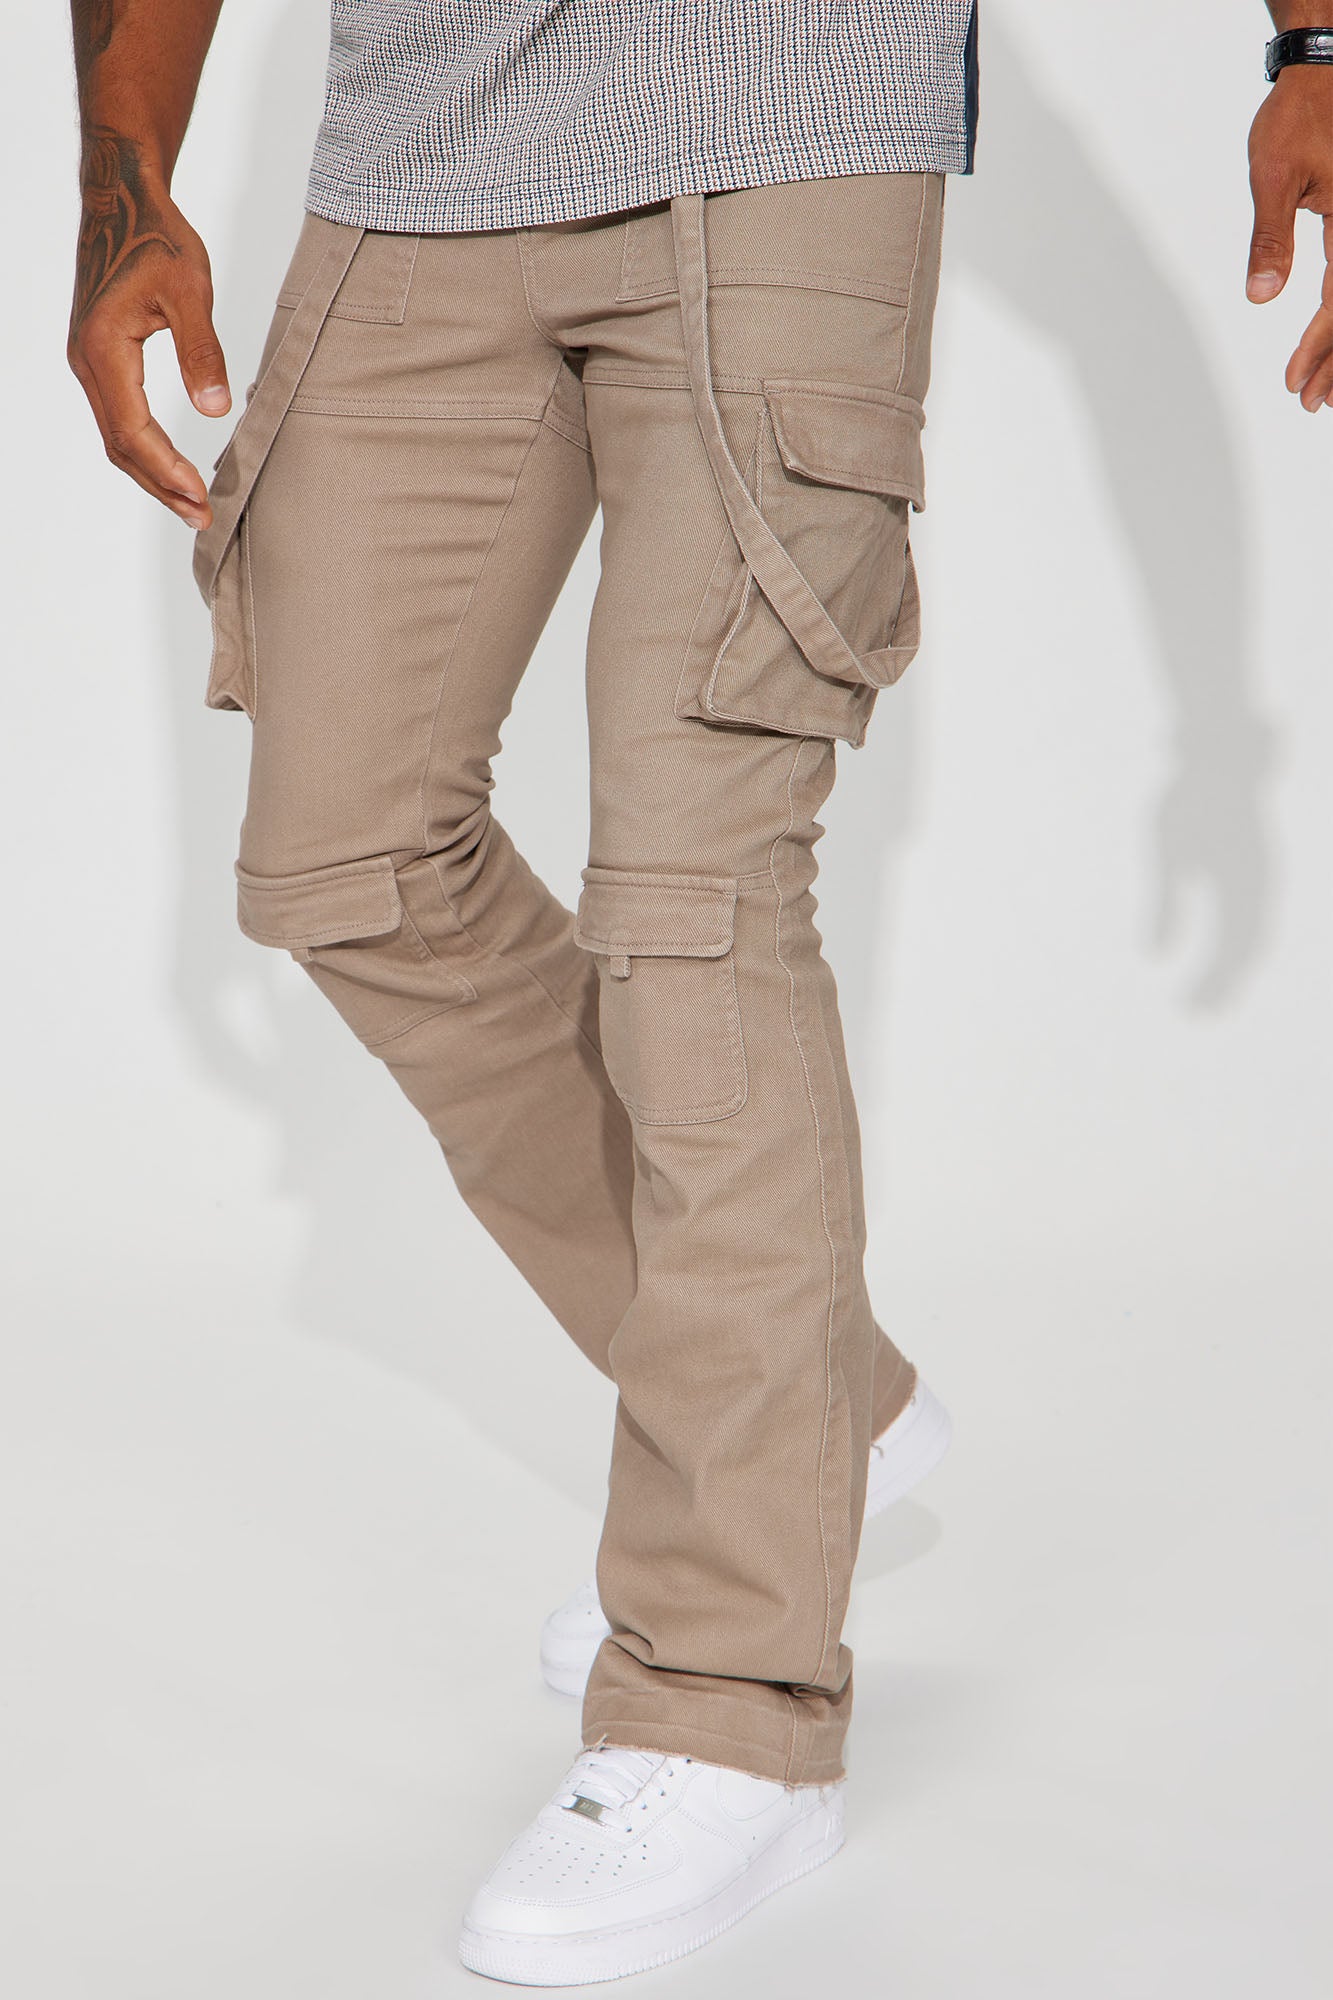 Strapped In Cargo Stacked Skinny Flare Jeans - Taupe